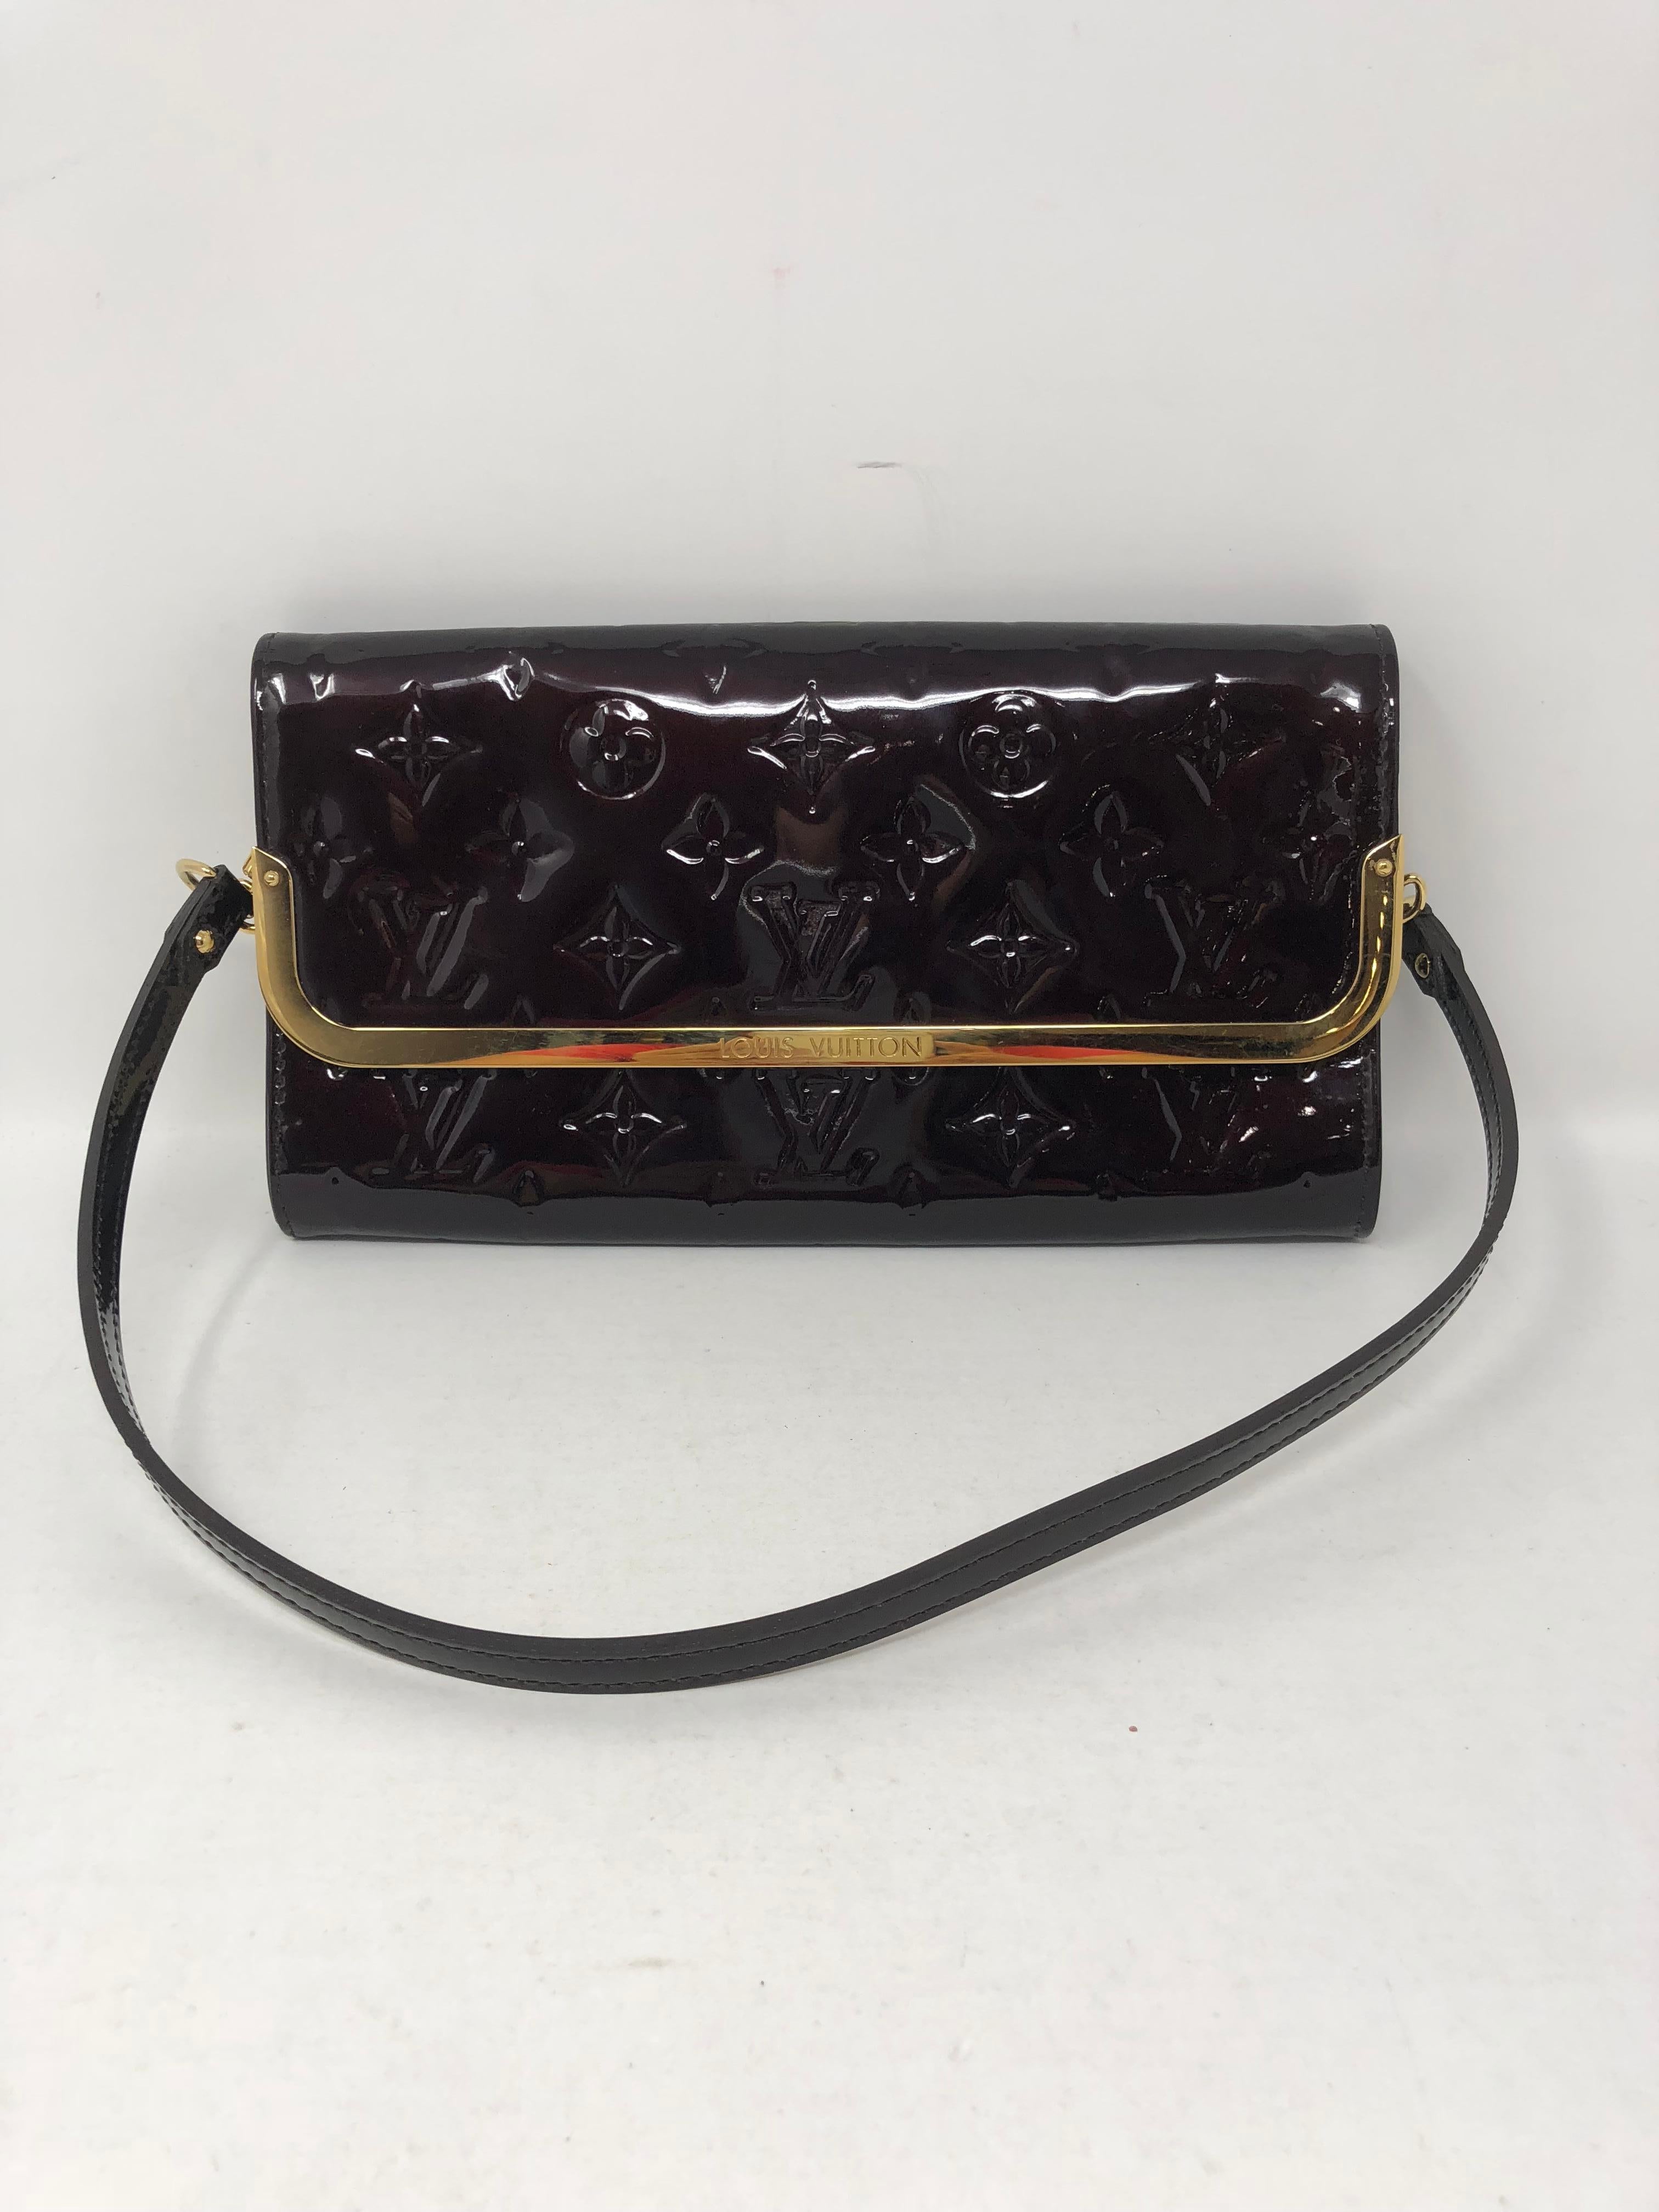 Louis Vuitton Vernis Clutch and shoulder bag. Dark burgundy color with gold hardware. Can be worn as a wallet too with credit card slots inside. Beautiful sheen in good condition. 